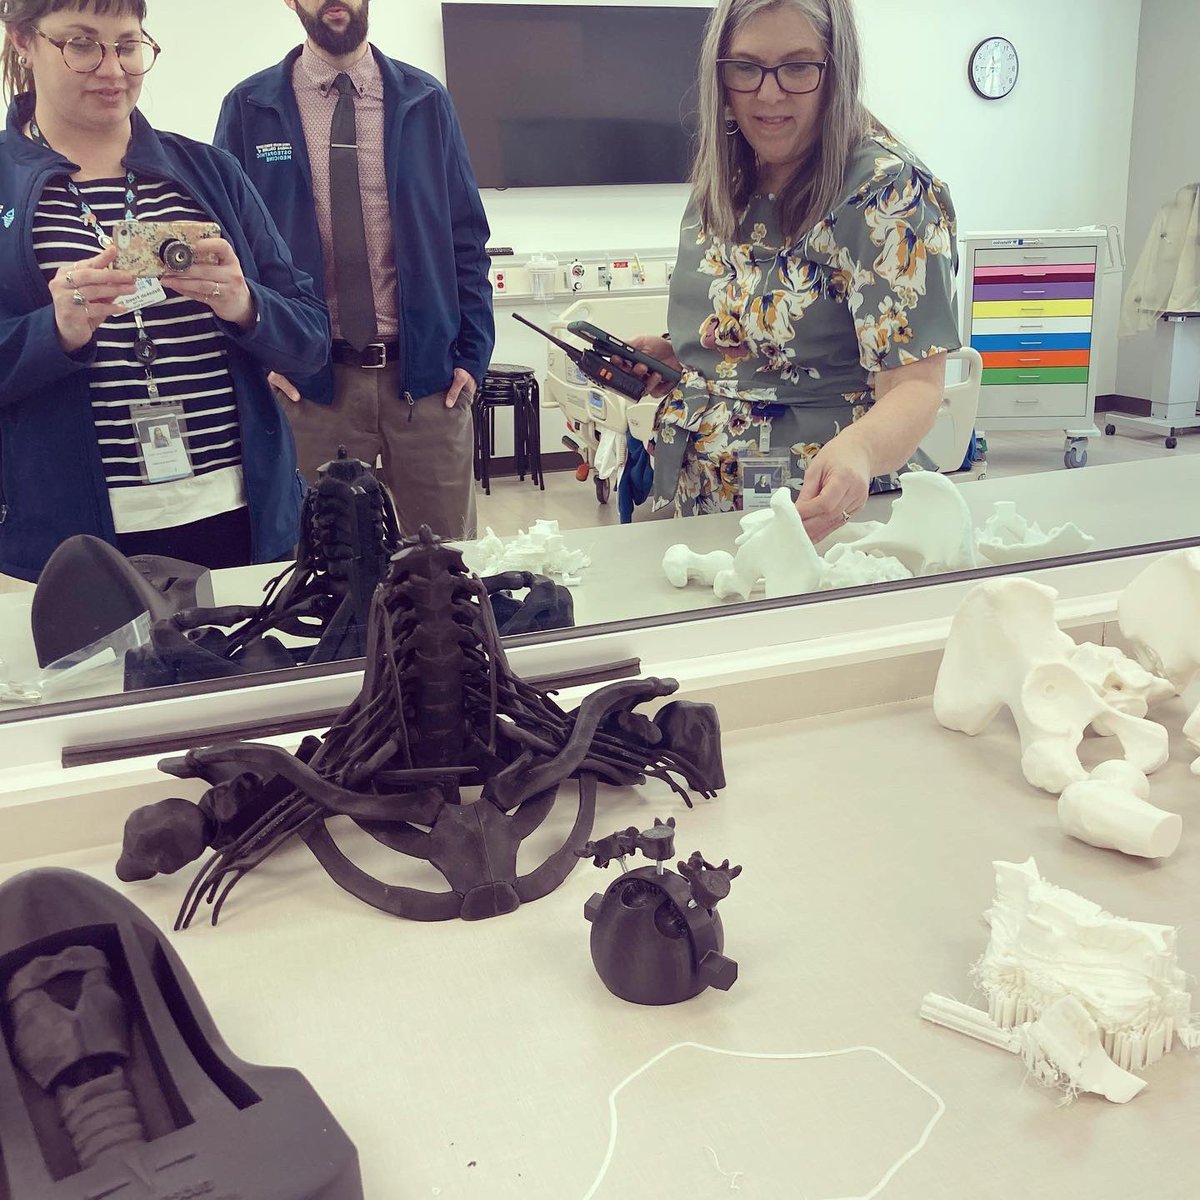 Learning specialists checking out the 3D printed working models for Osteopathic Medicine 👏🏼👏🏼👏🏼 #learningsciences #meducationalpsychology